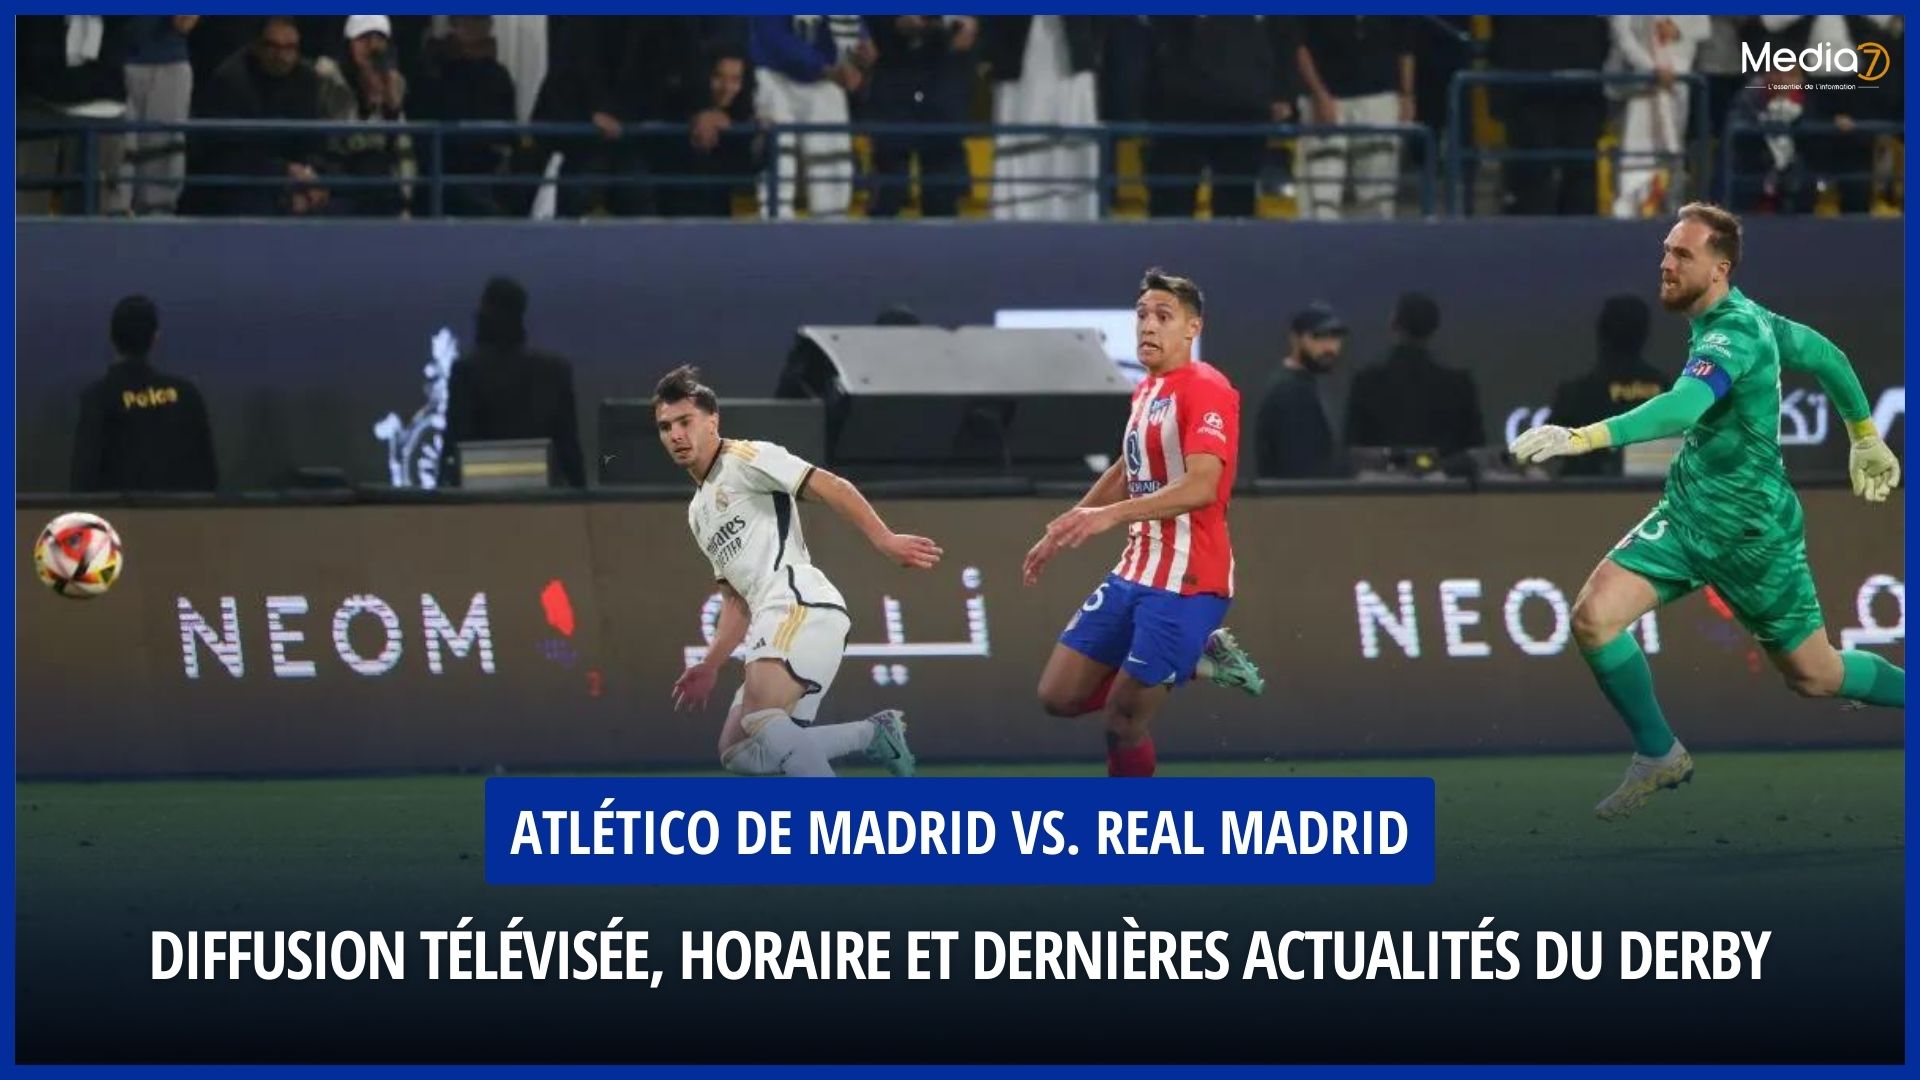 Atlético Madrid vs. Real Madrid: TV broadcast, schedule and latest derby news - Media7